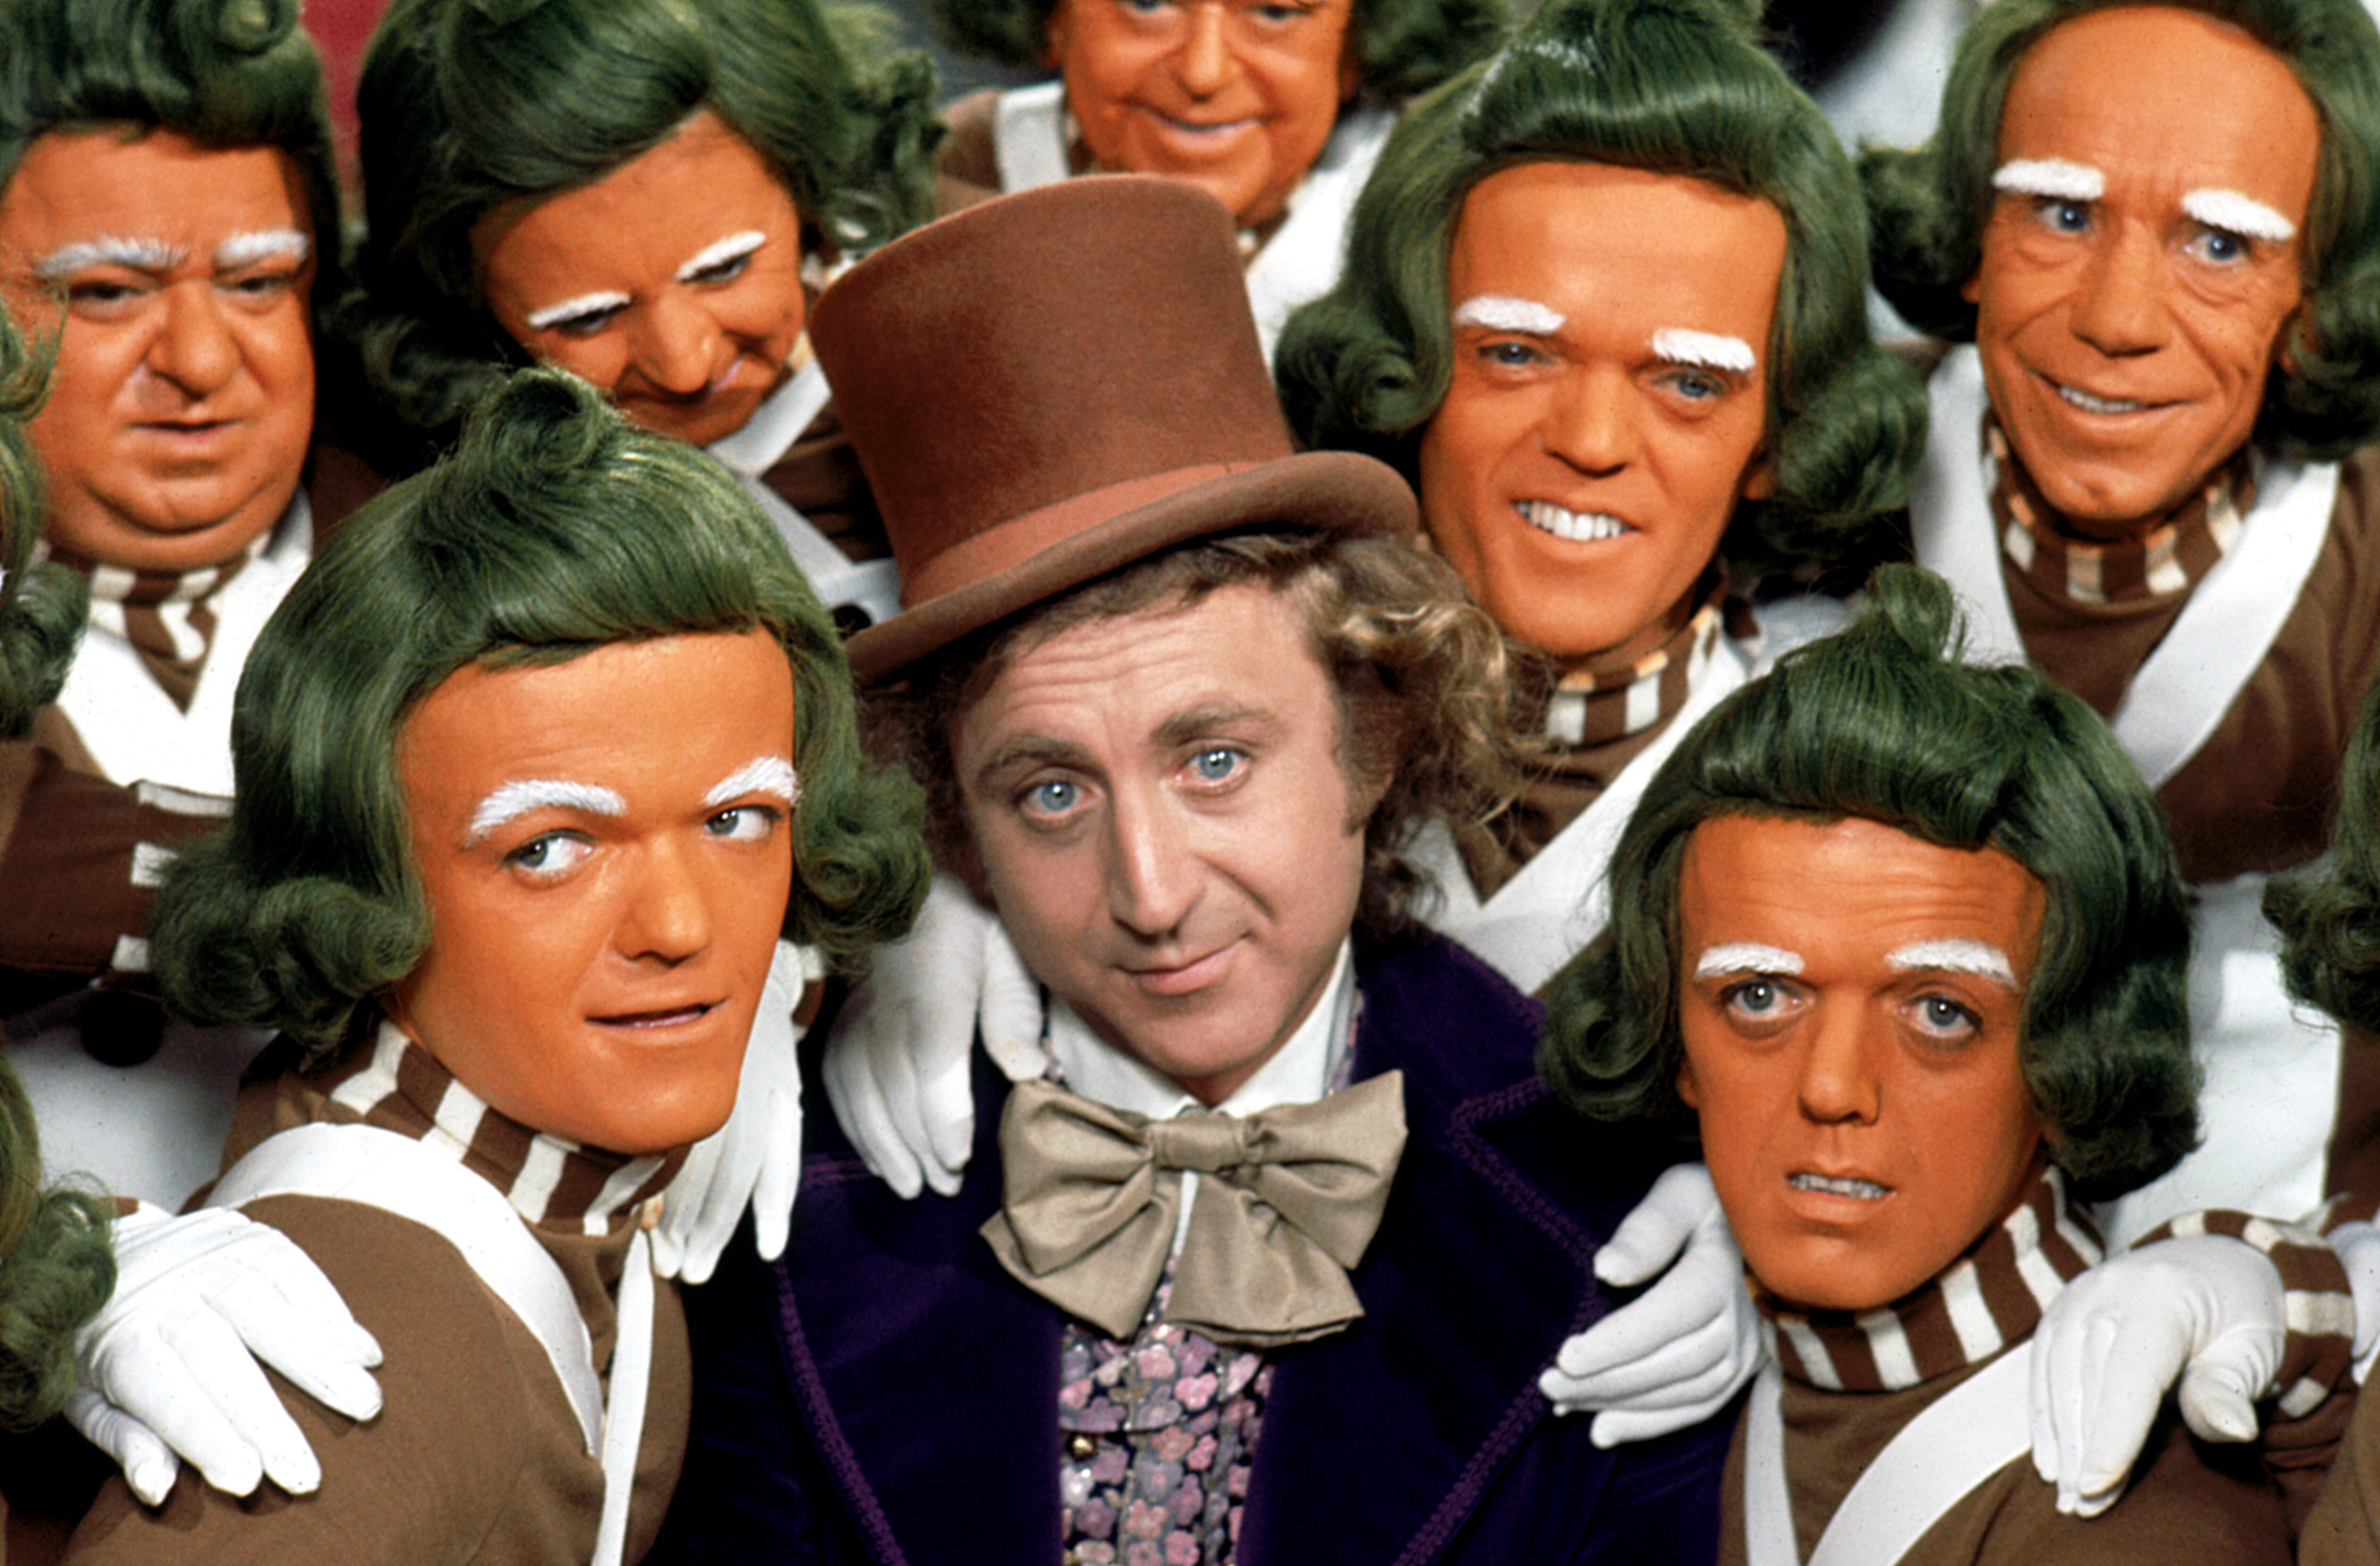 Willy Wonka is surrounded by Oompa Loompas